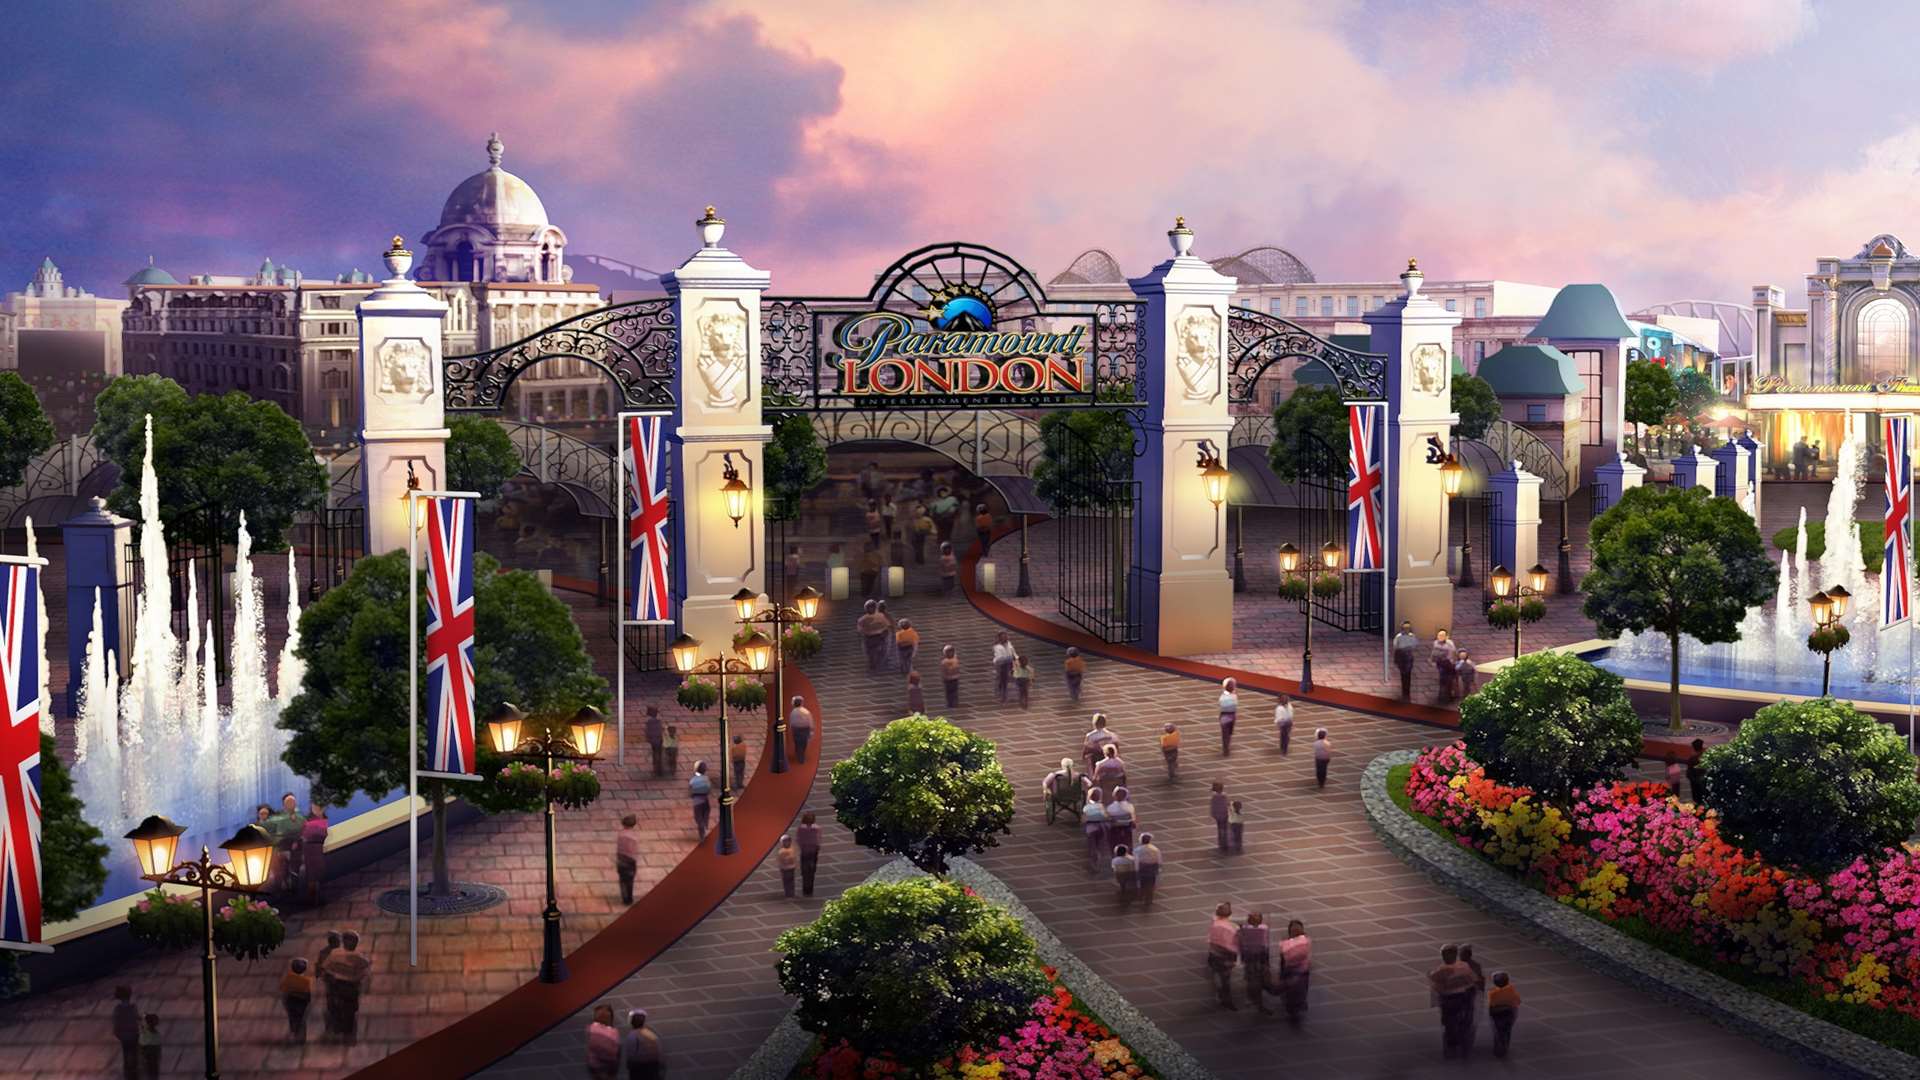 An artist's impression of plans for the London Paramount entertainment resort